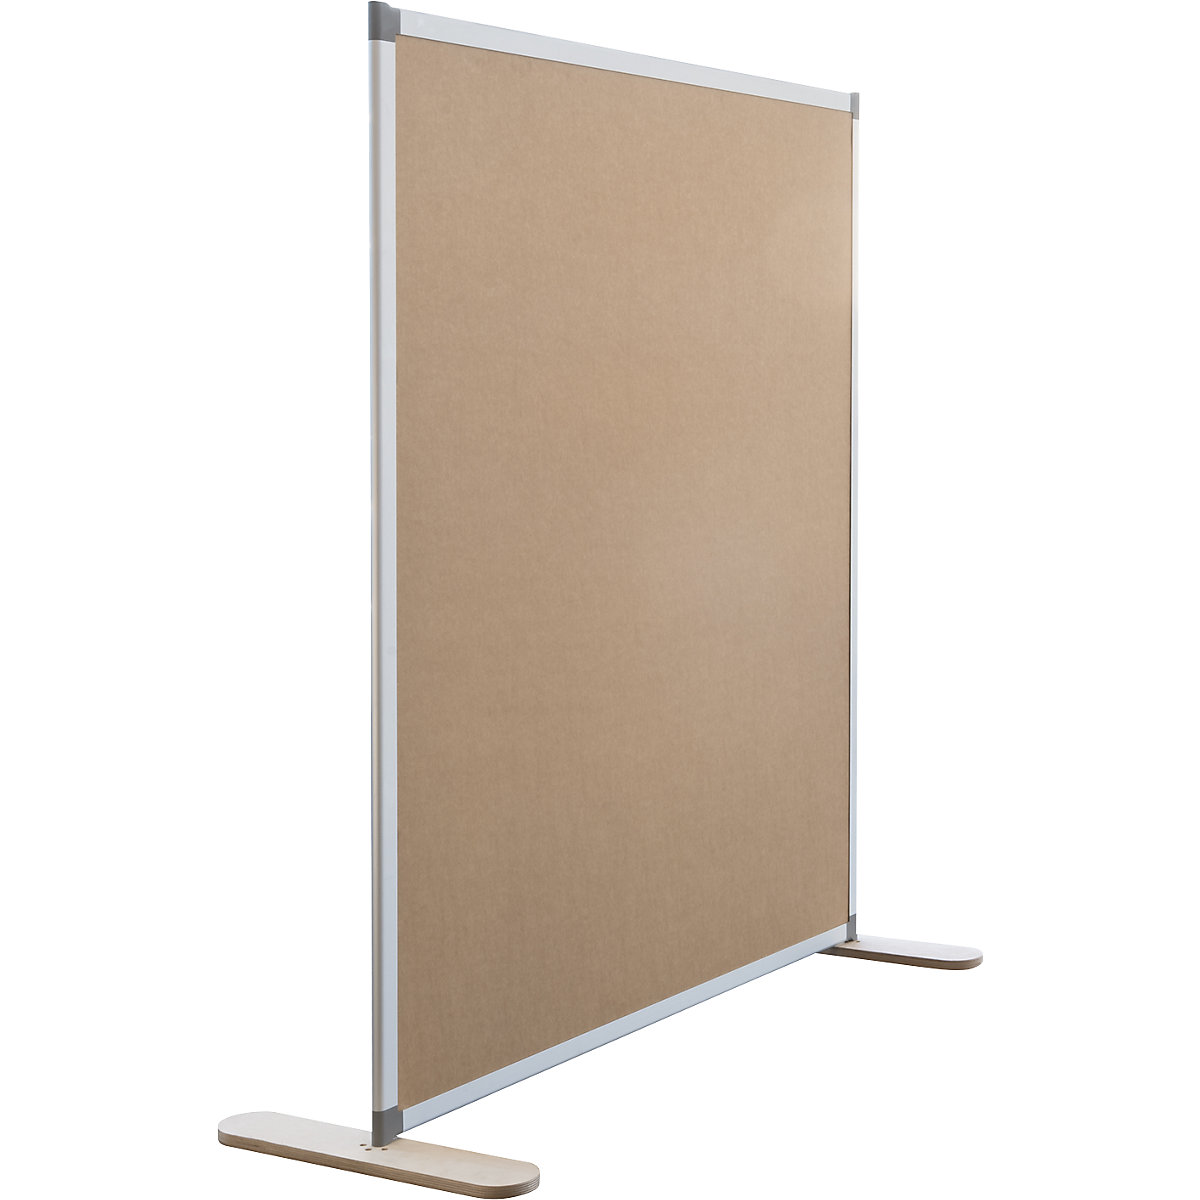 NATURAL partition: WxD 1250 x 500 mm, with honeycomb cardboard